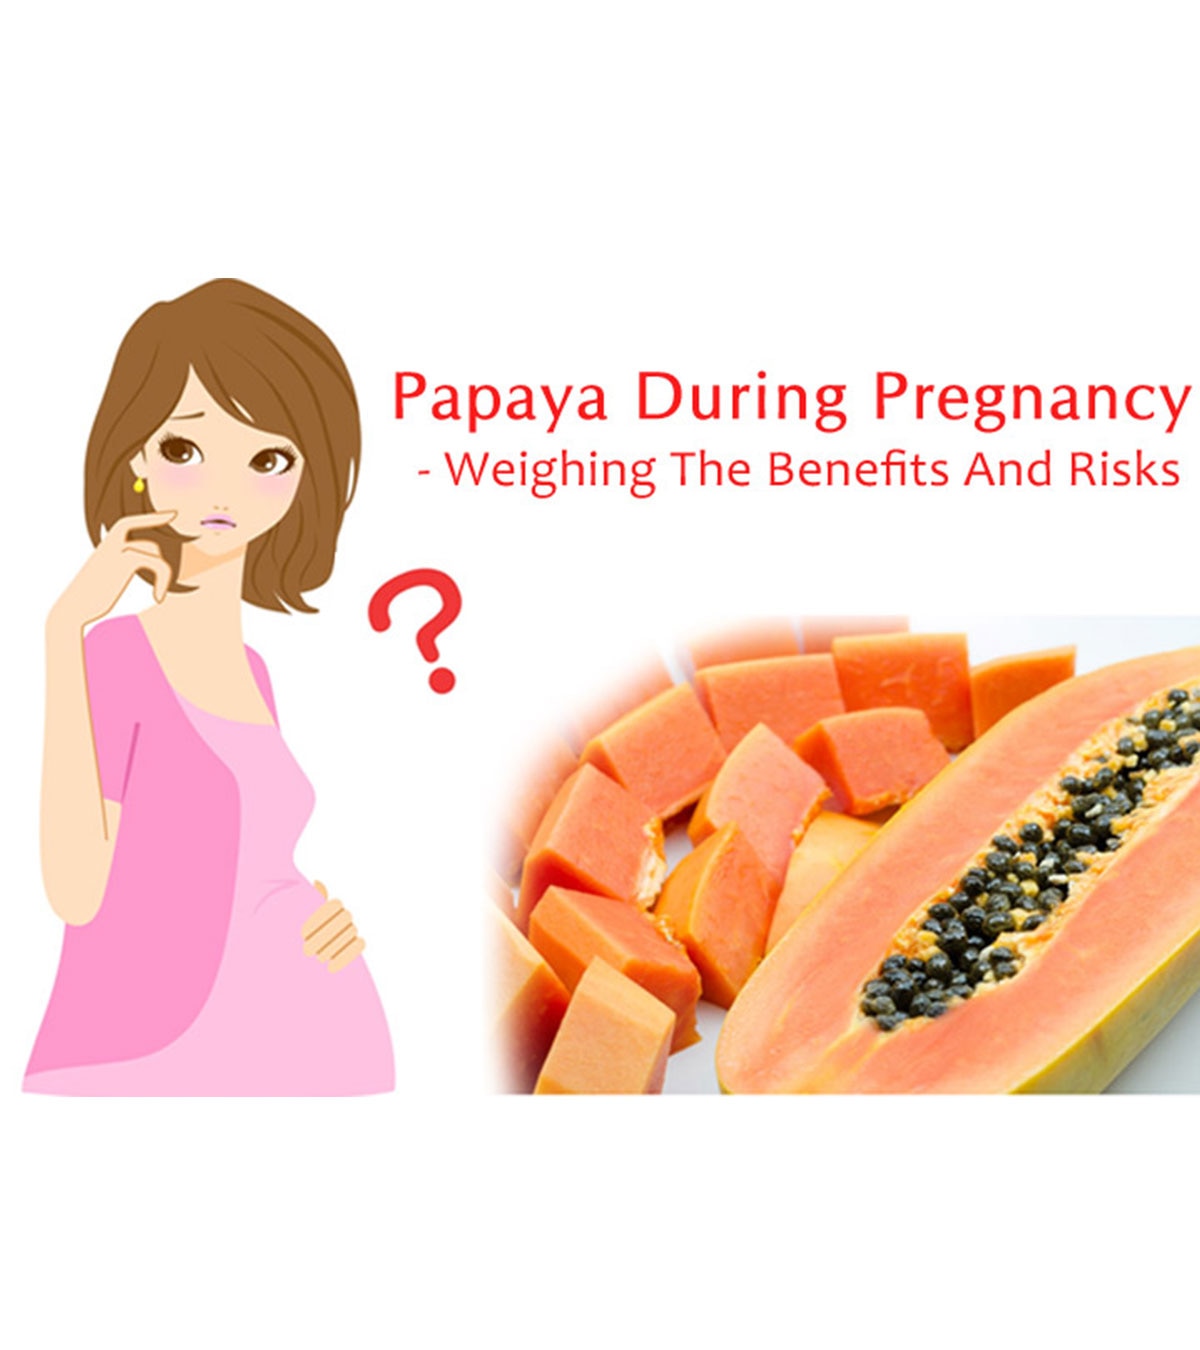 Papaya During Pregnancy: Does It Cause Miscarriage?